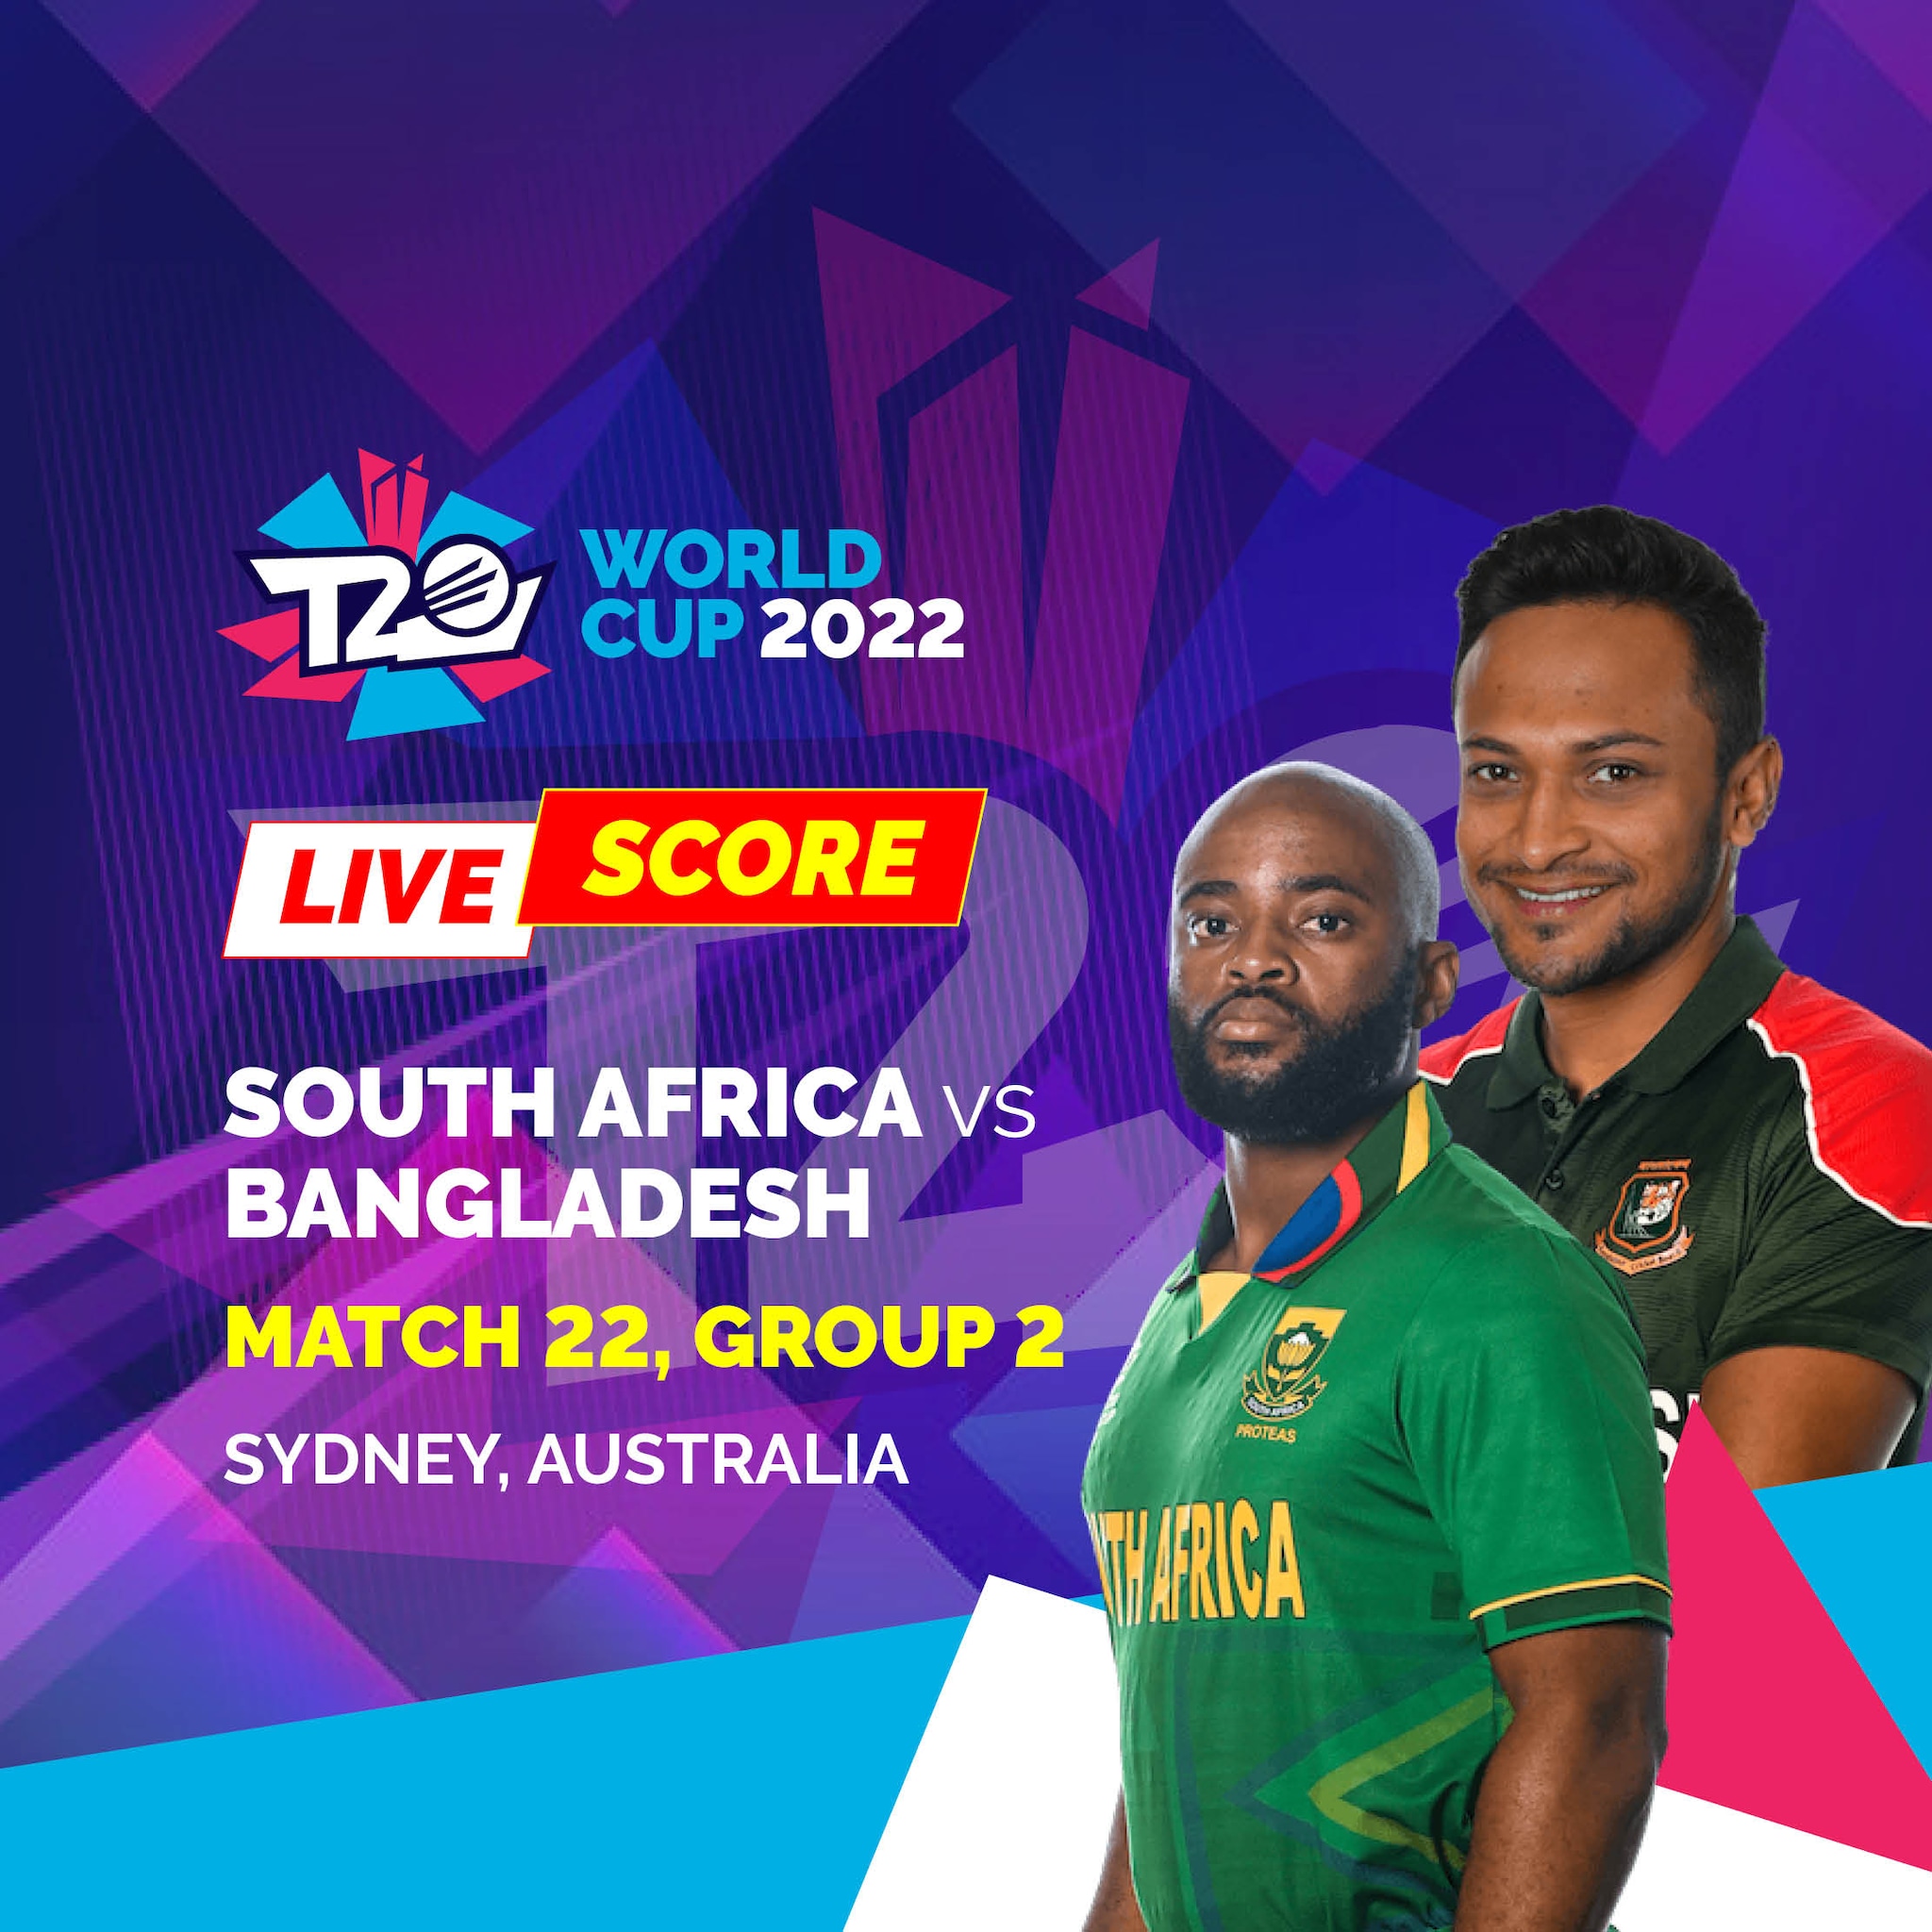 t2o world cup 2022 live